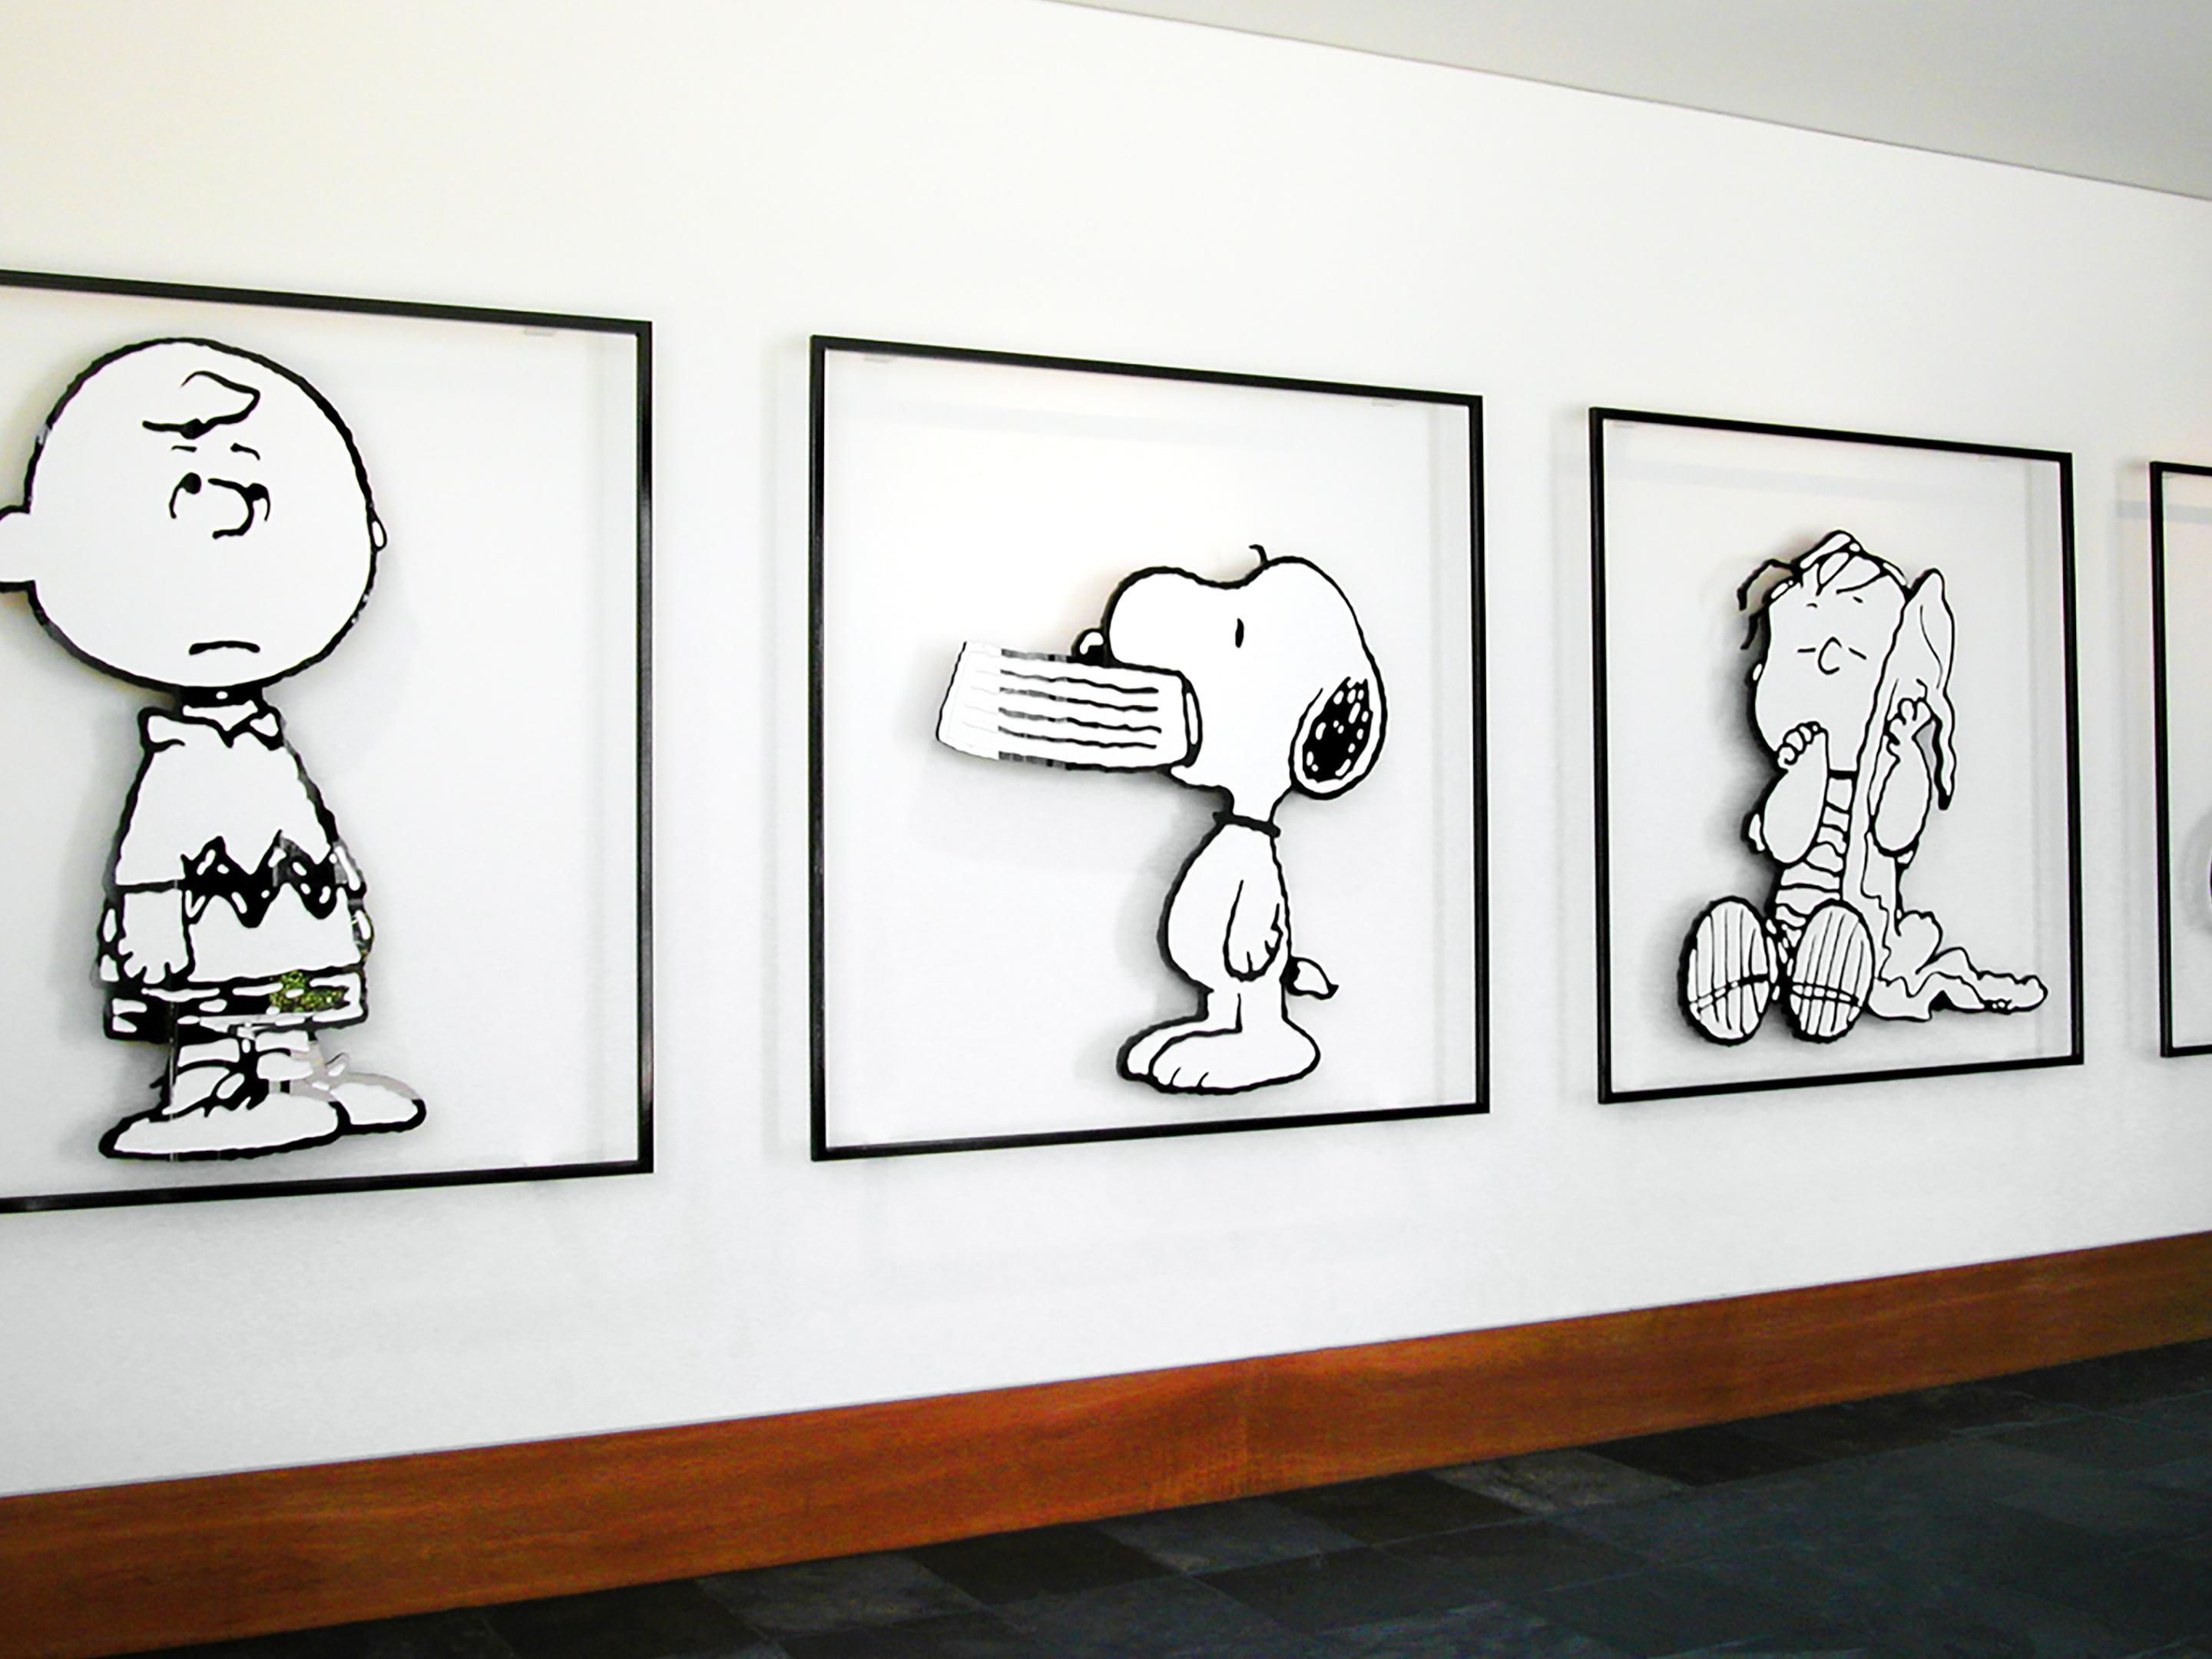 Located just 15 mins from the hotel.  The Schulz Museum is the perfect venue for Peanuts lovers young and old.  View the largest collection of original Peanuts art work in the world at the Charles M. Schulz Museum. Located in Santa Rosa, California